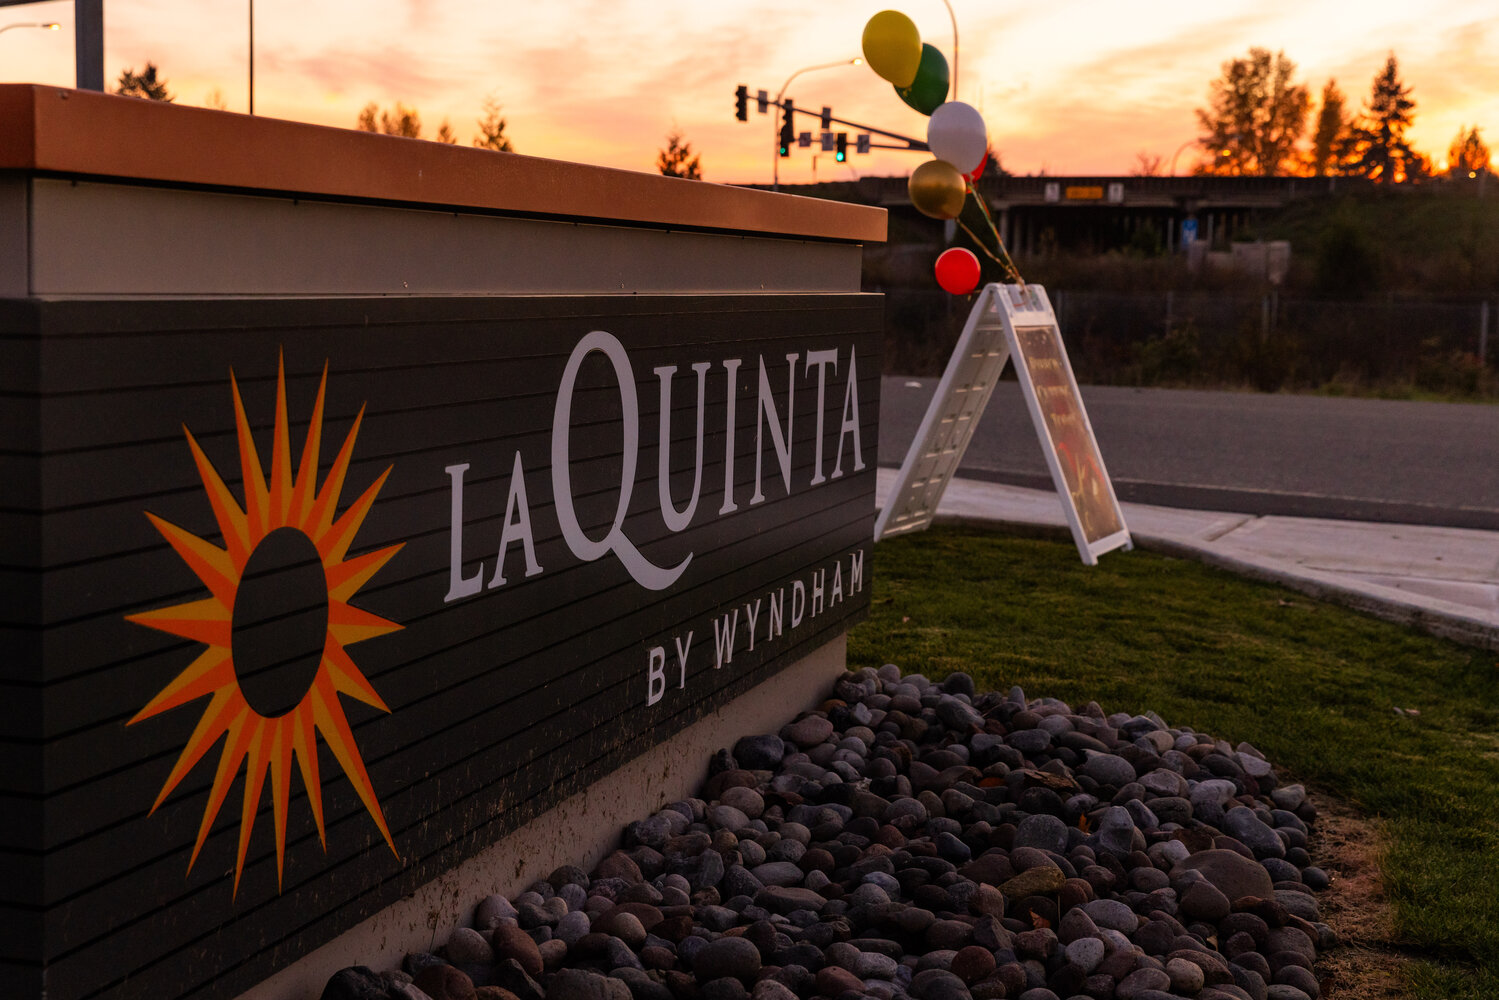 La Quinta by Wyndham is located at 1225 Mellen St. in Centralia.